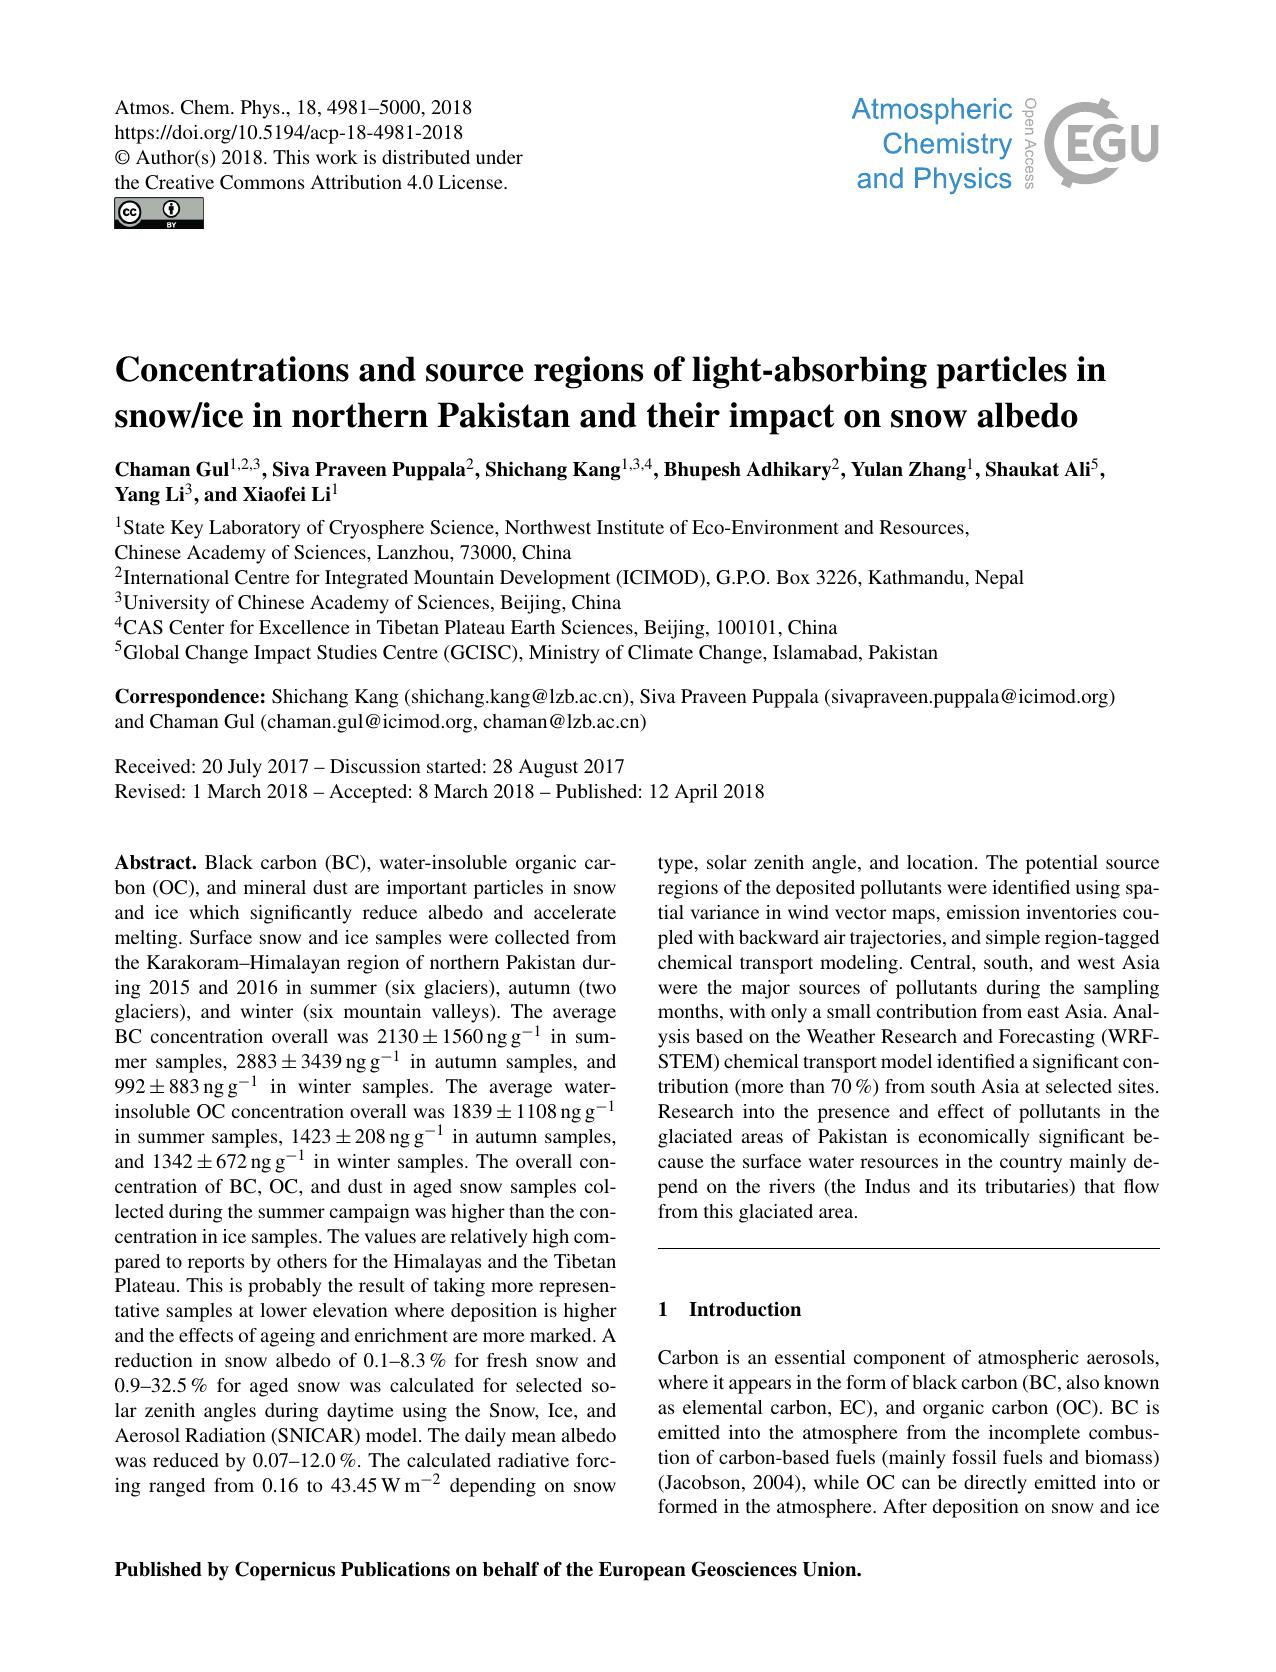 Concentrations and Source Regions of Light-Absorbing Particles in Snow/Ice in Northern Pakistan and Their Impact on Snow Albedo